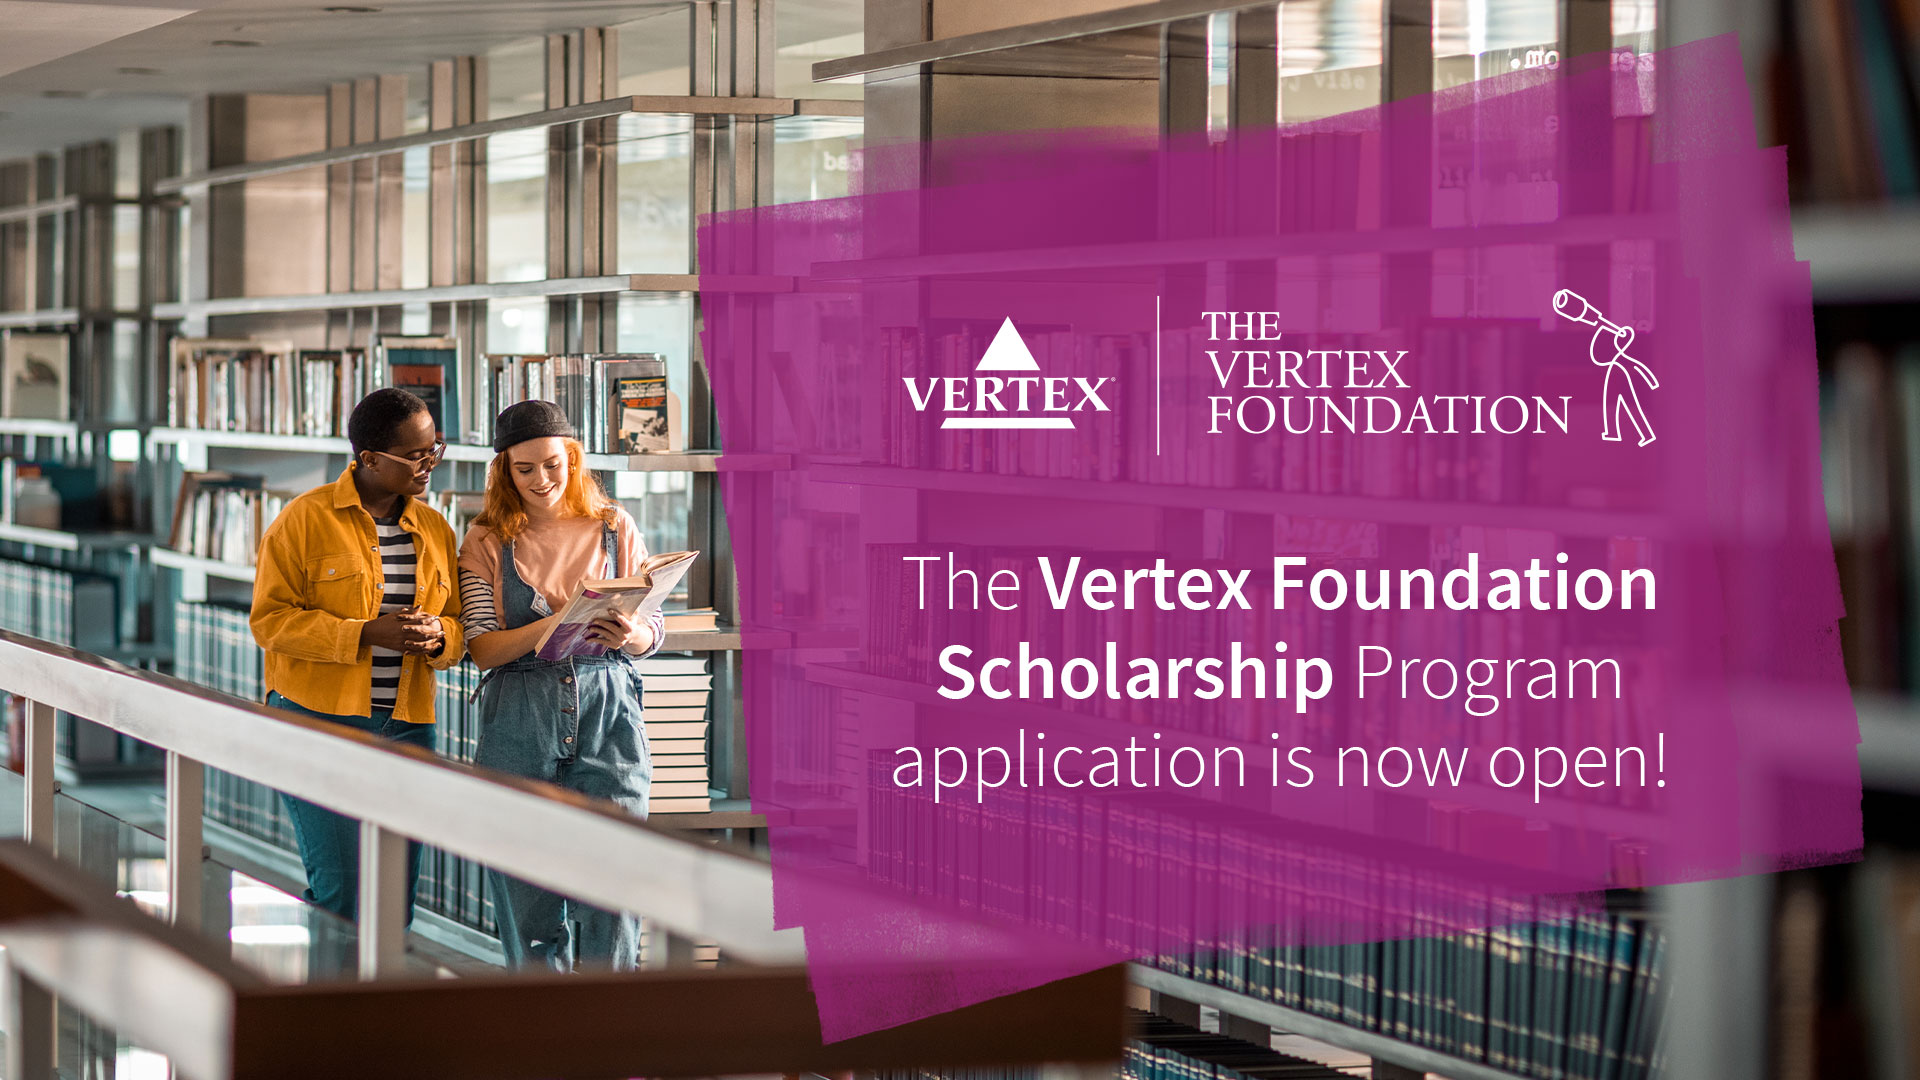 Image announcing that the Vertex Foundation Scholarship Program application is now open